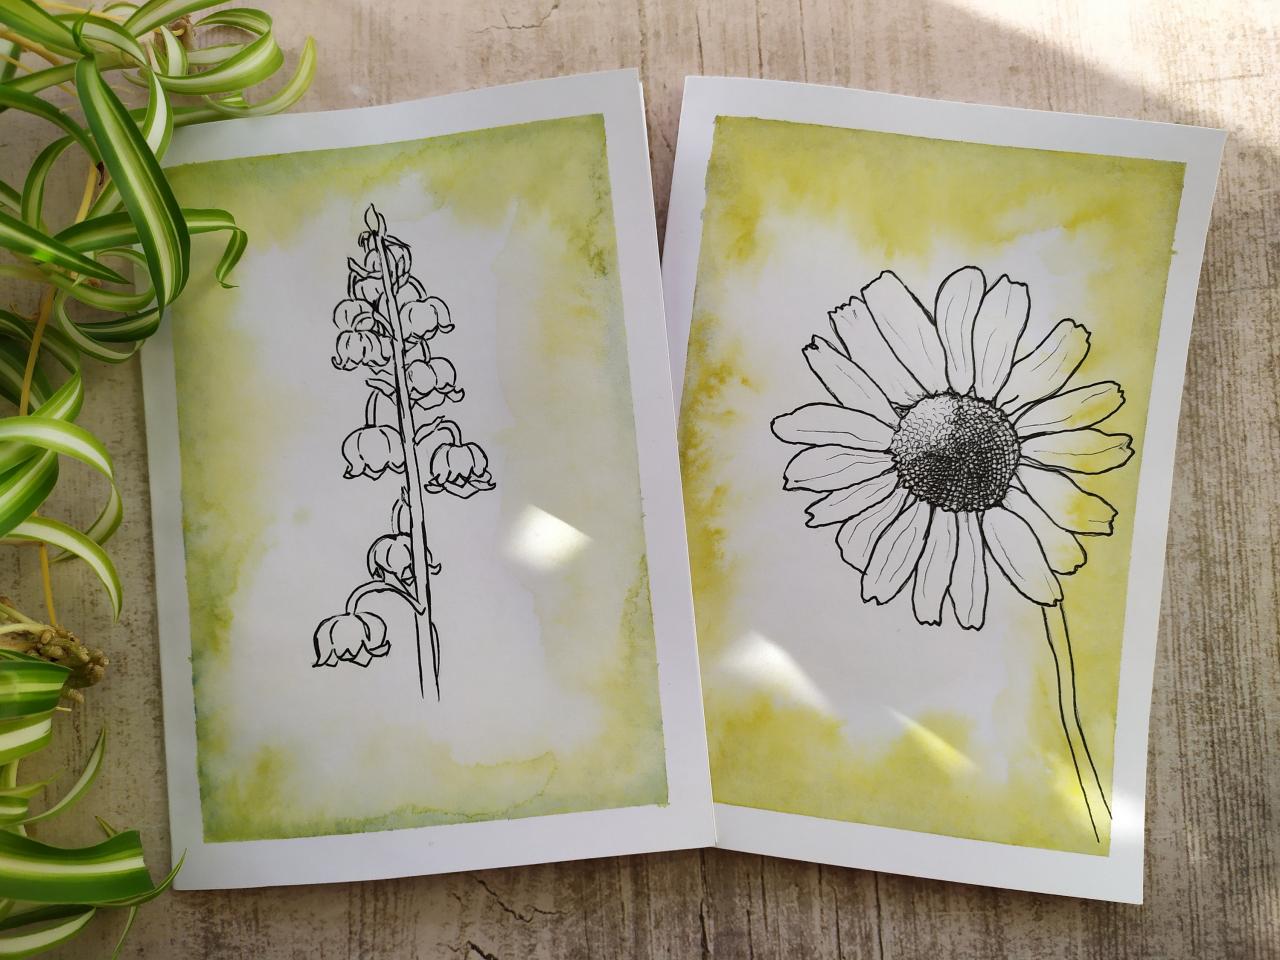 Botanical Watercolor Greeting Card For Her,gifting Card With Handdrawn Spring Flower, Friends Green Floral Card,lily Of The Valley Daisy